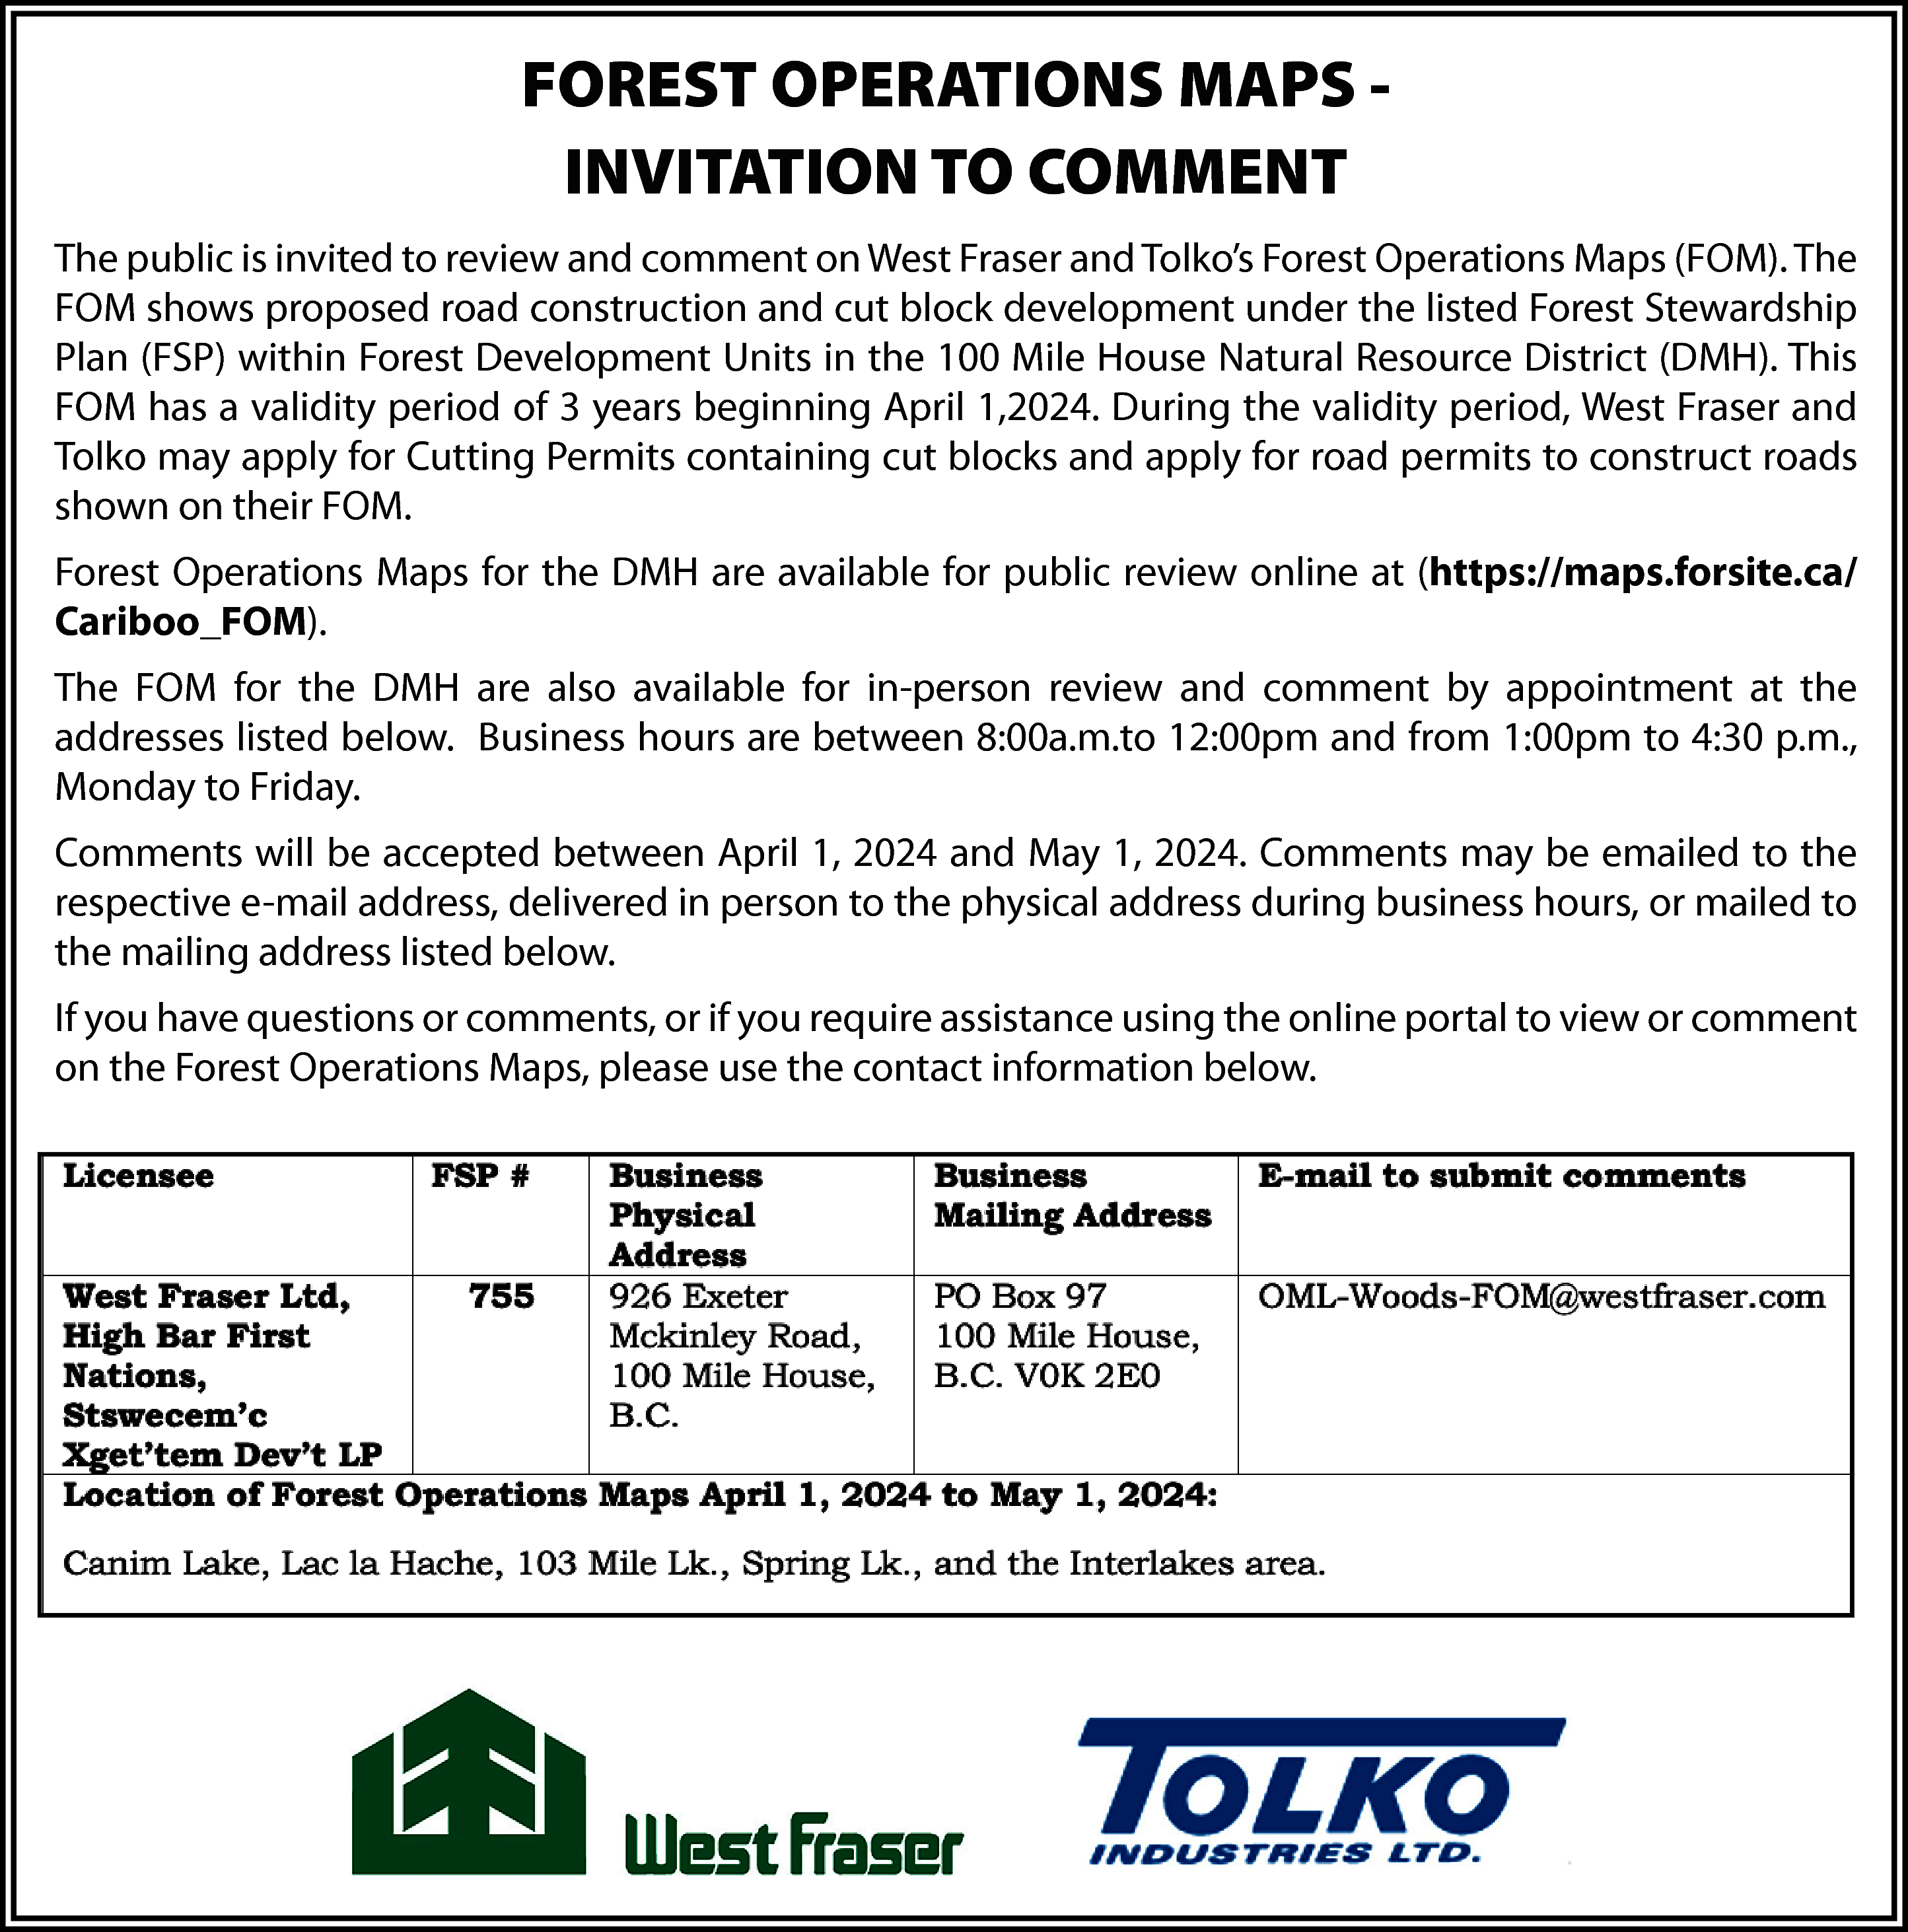 FOREST OPERATIONS MAPS INVITATION TO  FOREST OPERATIONS MAPS INVITATION TO COMMENT  The public is invited to review and comment on West Fraser and Tolko’s Forest Operations Maps (FOM). The  FOM shows proposed road construction and cut block development under the listed Forest Stewardship  Plan (FSP) within Forest Development Units in the 100 Mile House Natural Resource District (DMH). This  FOM has a validity period of 3 years beginning April 1,2024. During the validity period, West Fraser and  Tolko may apply for Cutting Permits containing cut blocks and apply for road permits to construct roads  shown on their FOM.  Forest Operations Maps for the DMH are available for public review online at (https://maps.forsite.ca/  Cariboo_FOM).  The FOM for the DMH are also available for in-person review and comment by appointment at the  addresses listed below. Business hours are between 8:00a.m.to 12:00pm and from 1:00pm to 4:30 p.m.,  Monday to Friday.  Comments will be accepted between April 1, 2024 and May 1, 2024. Comments may be emailed to the  respective e-mail address, delivered in person to the physical address during business hours, or mailed to  the mailing address listed below.  If you have questions or comments, or if you require assistance using the online portal to view or comment  on the Forest Operations Maps, please use the contact information below.    